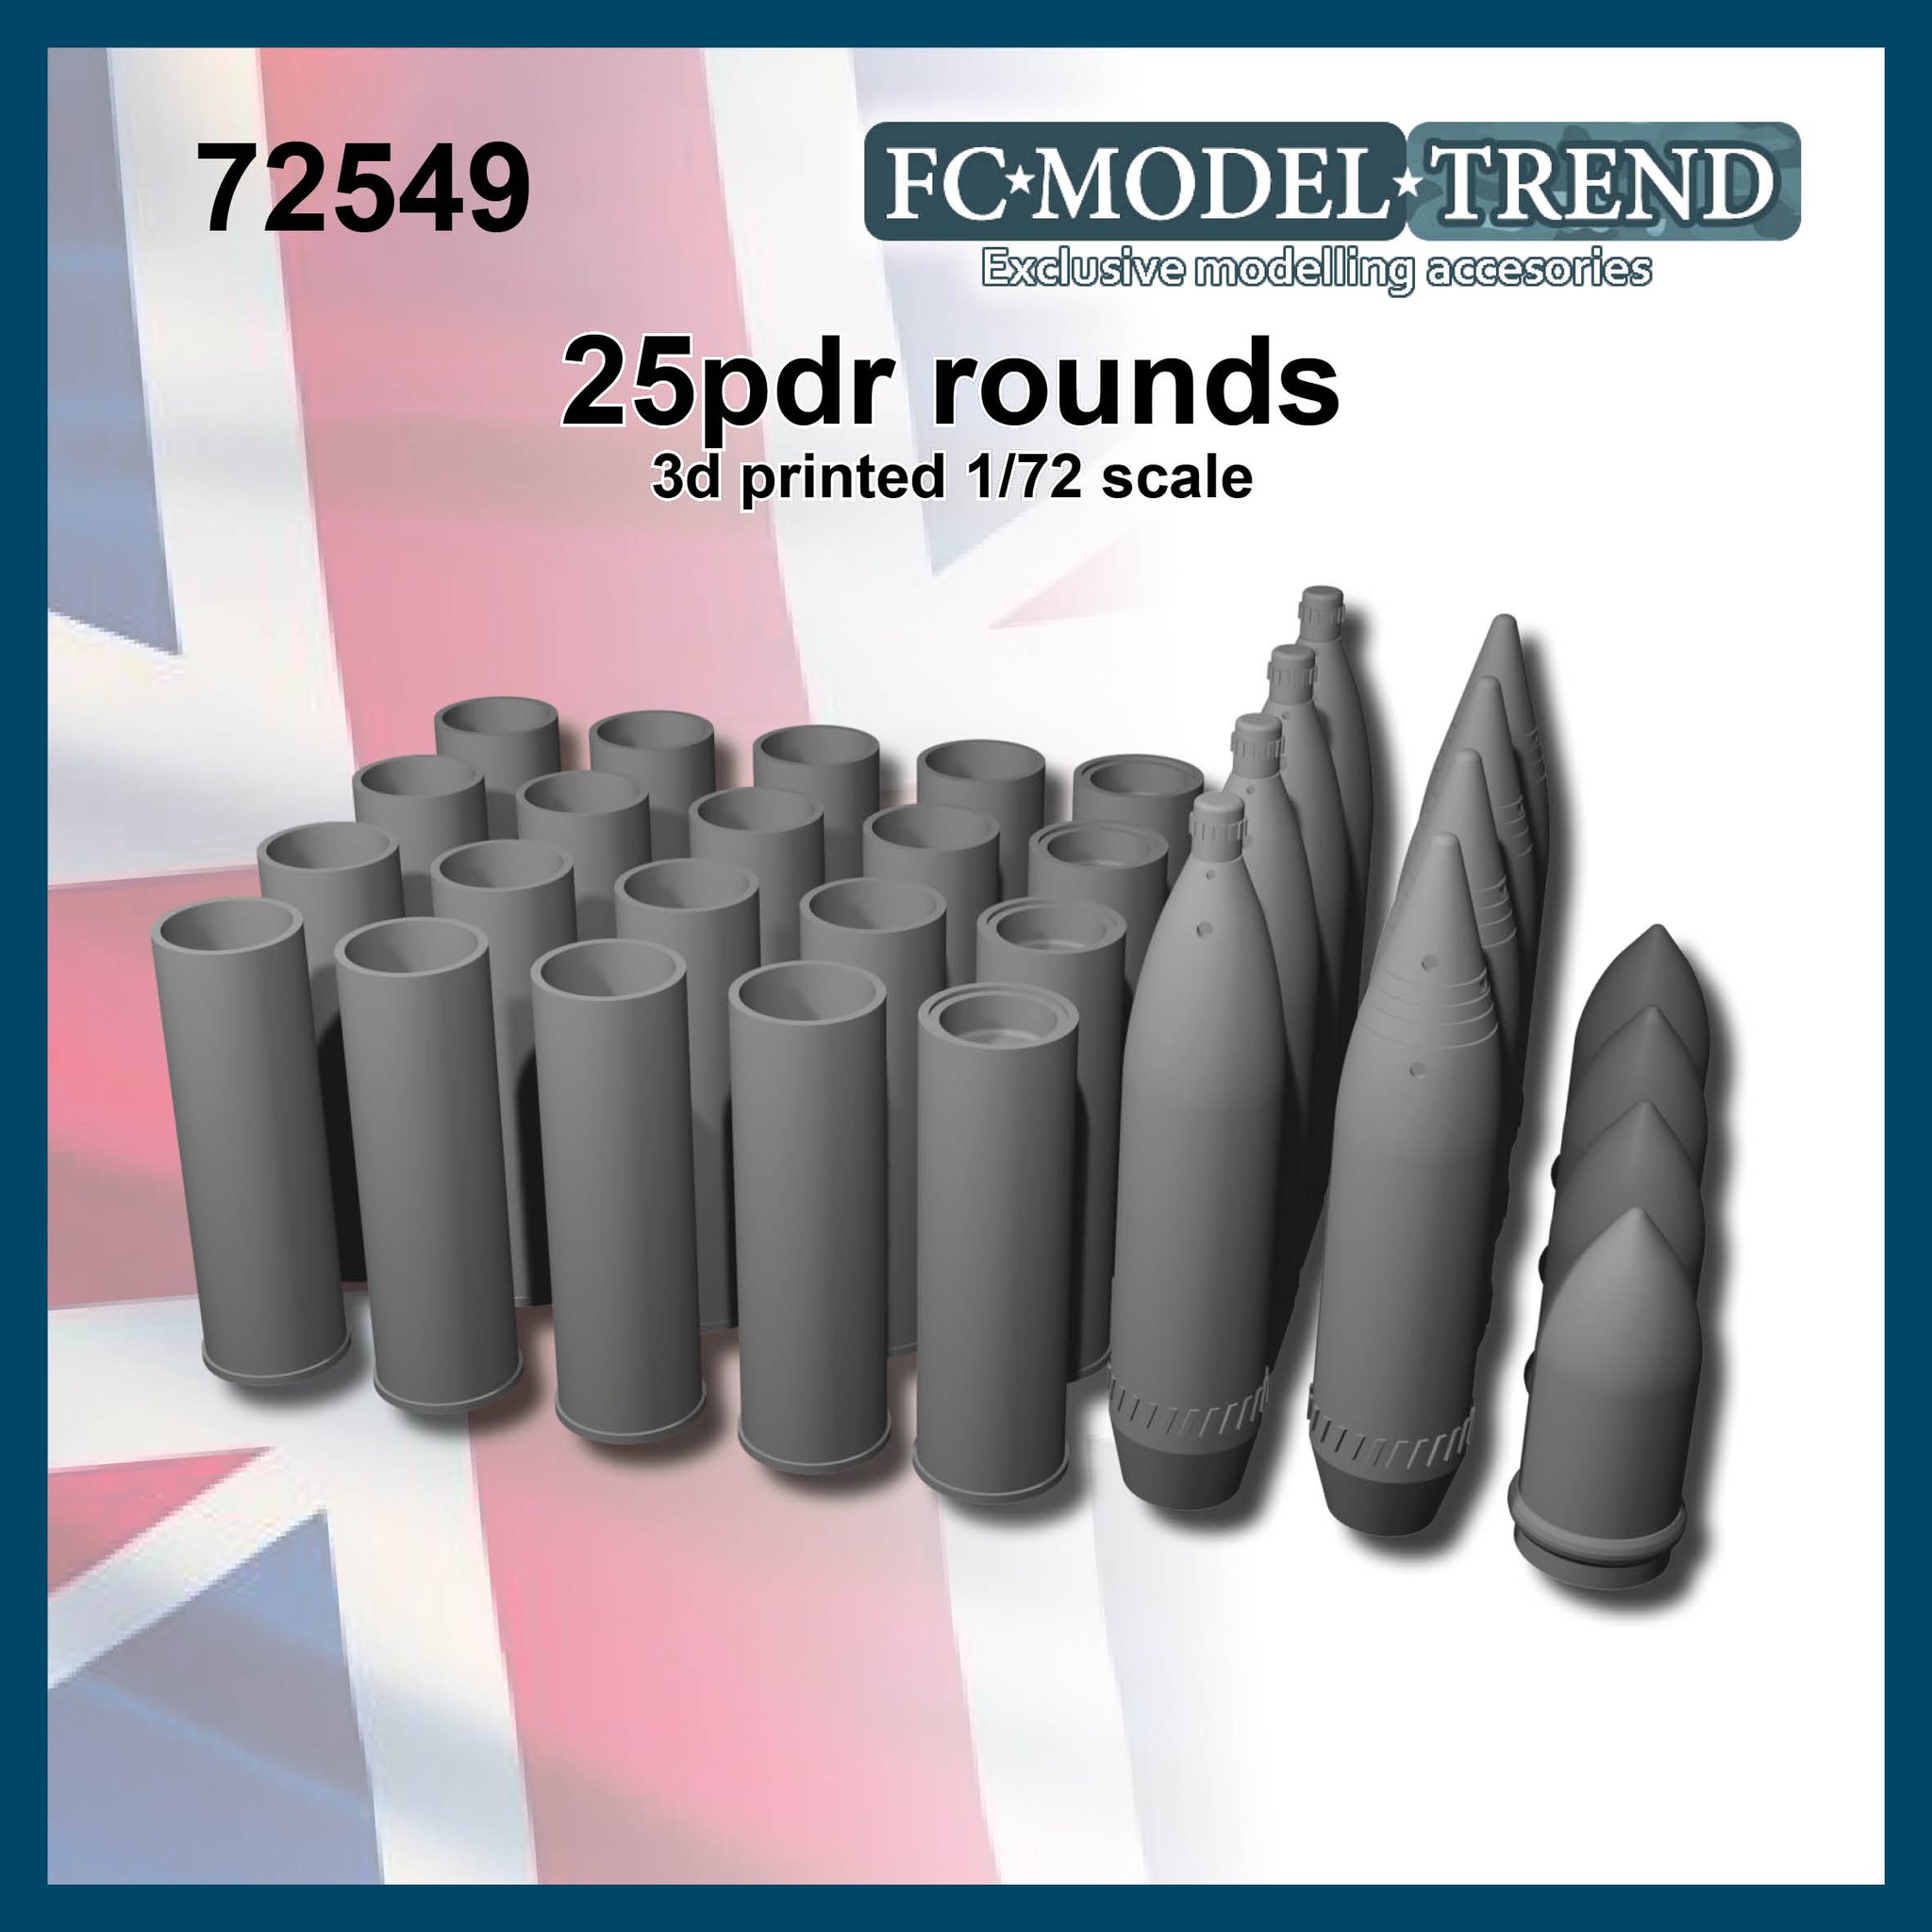 25pdr rounds for QR ordnance howitzer